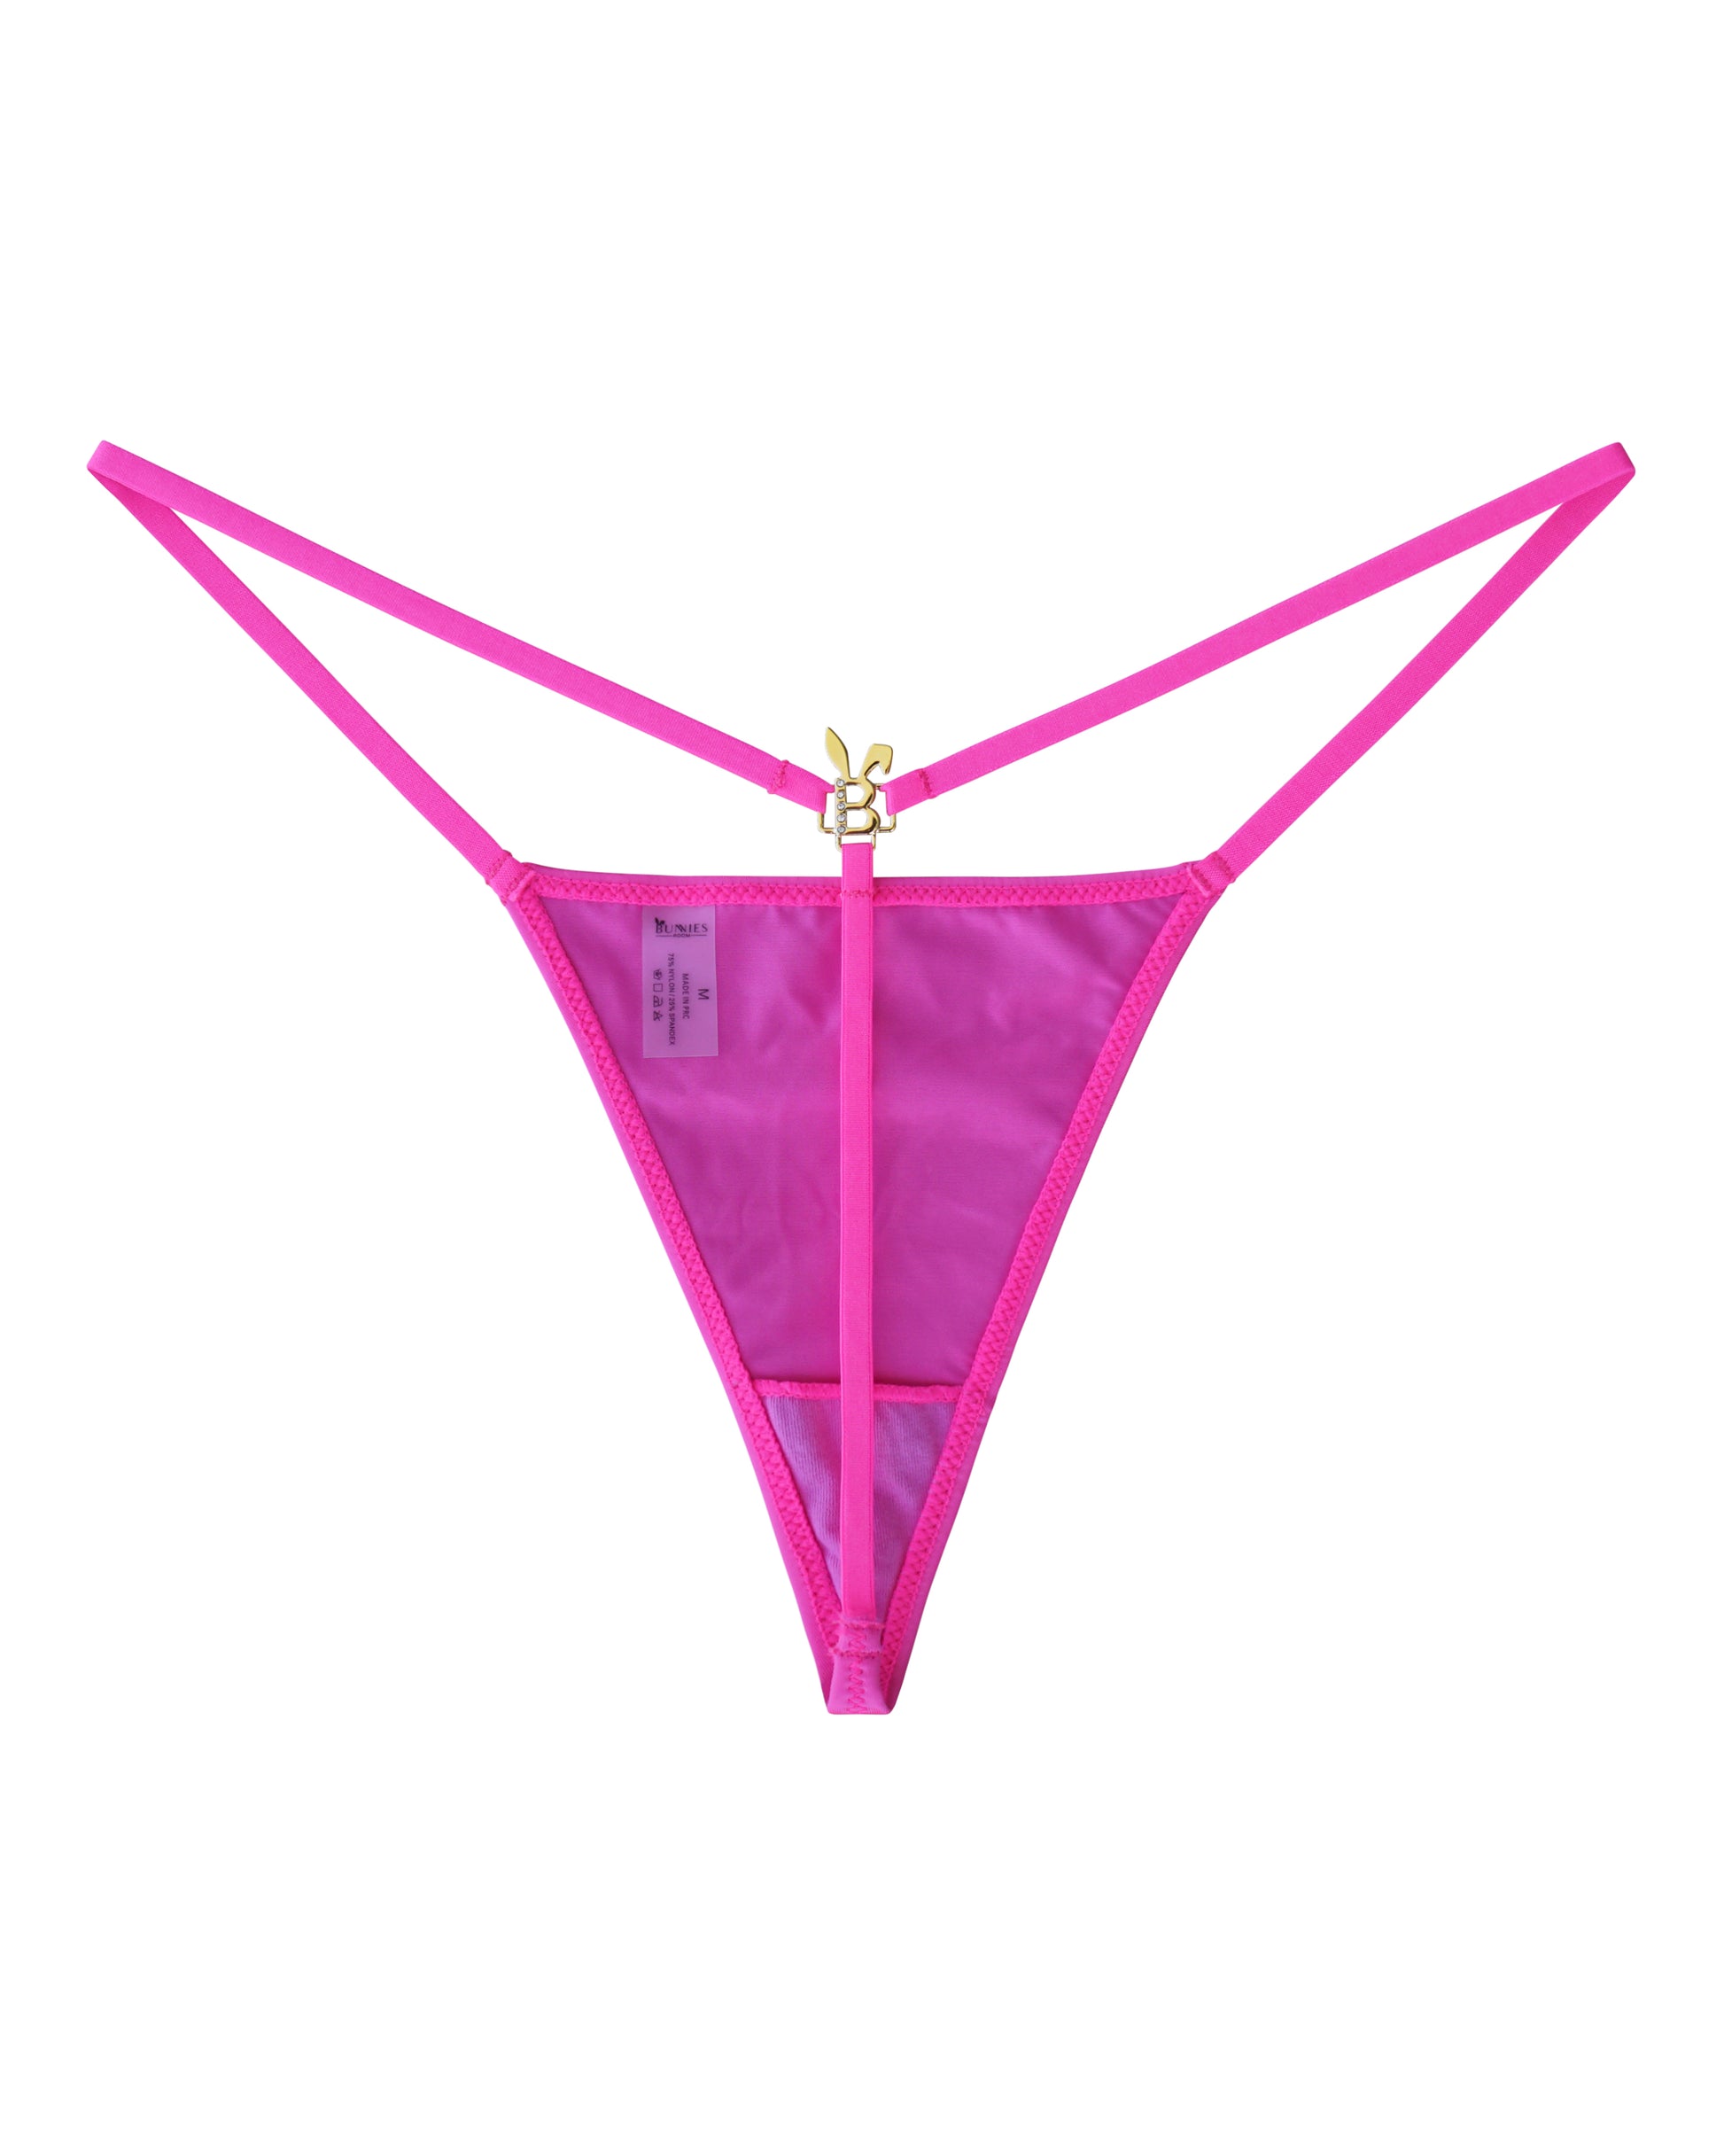 BUNNY G-STRING THONG IN HOT PINK